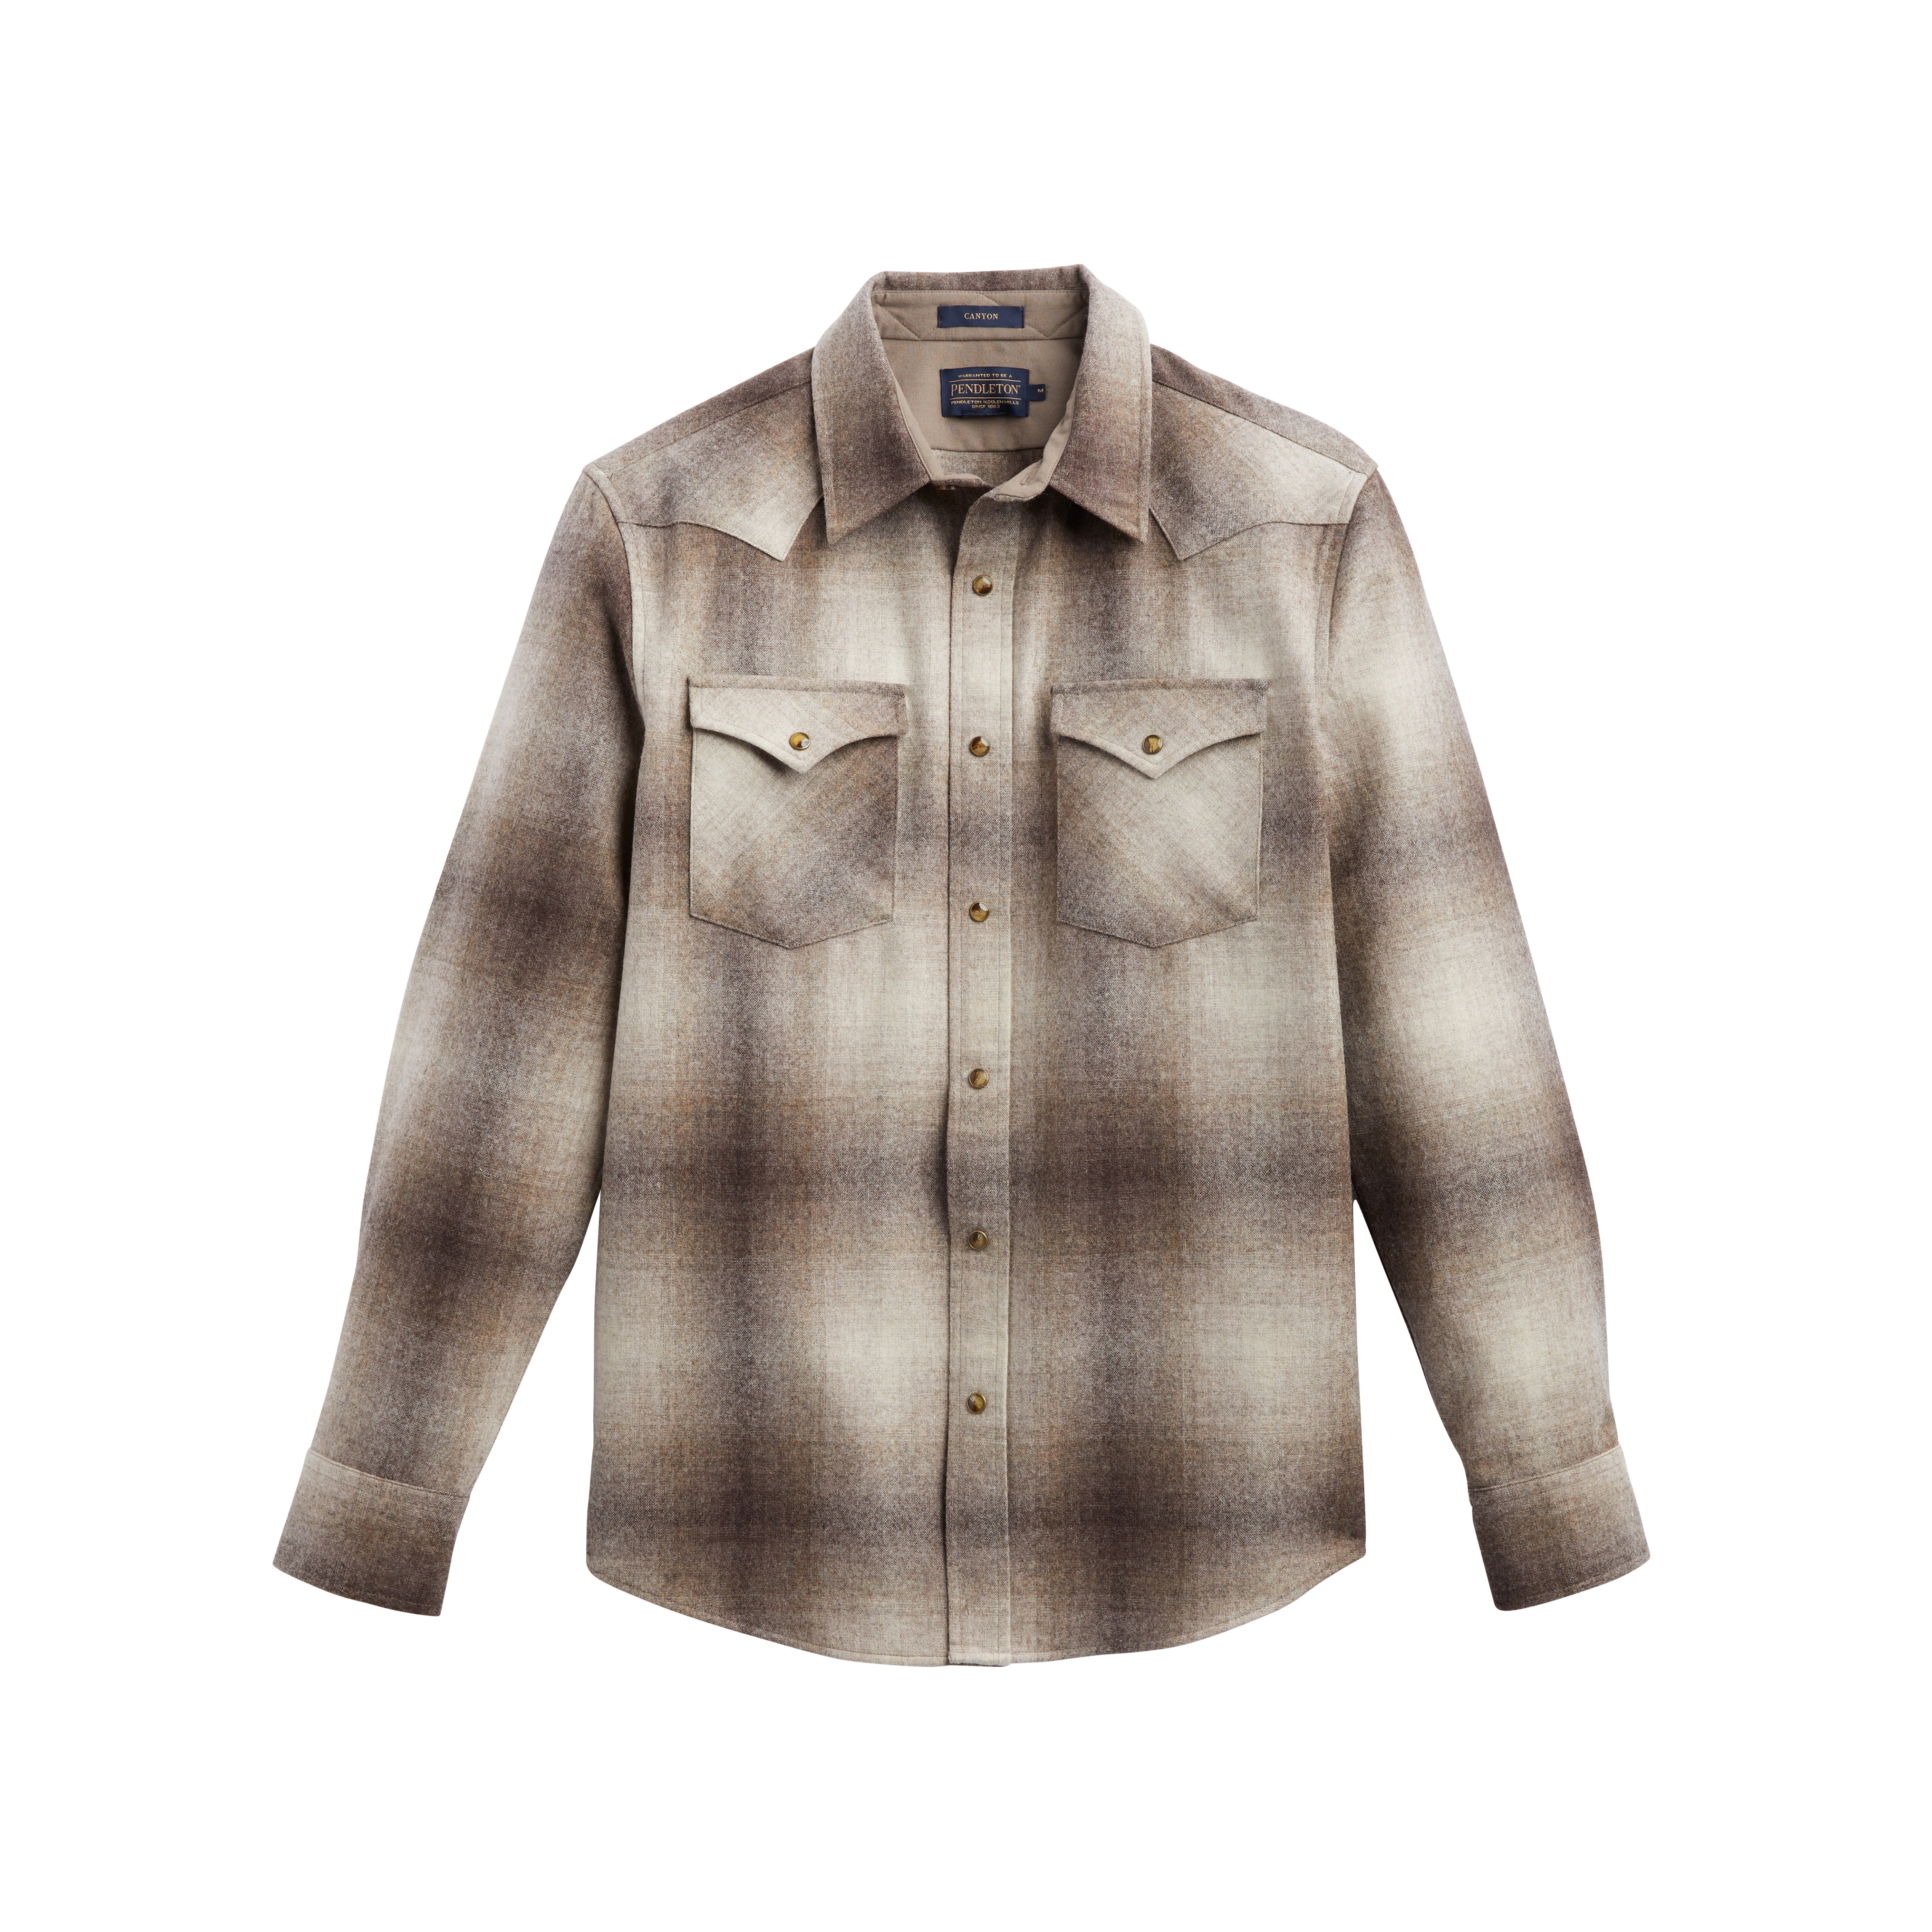 Western Shirts - Snapping Into An Americana Classic